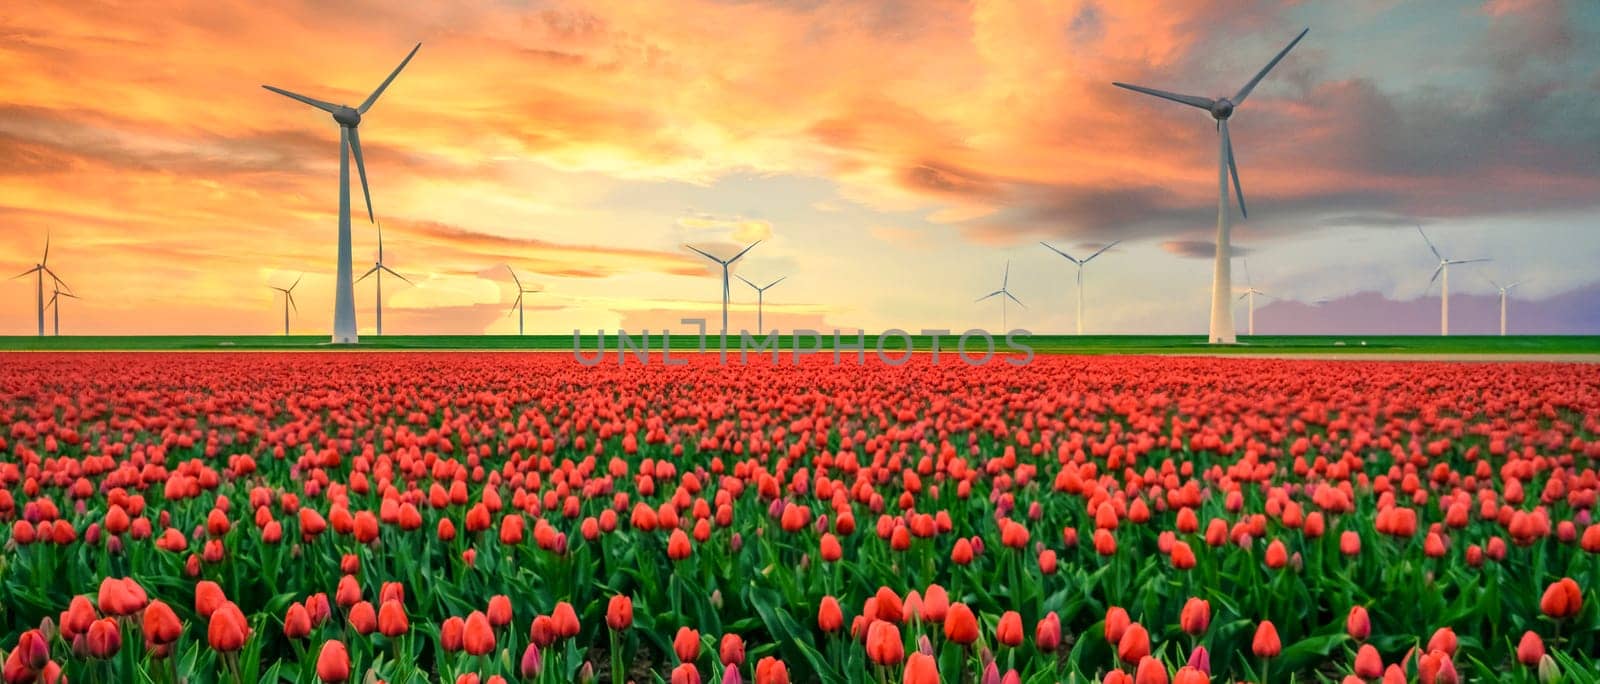 Windmill Park at sunset with a field of tulip flowers in the Netherlands Europe, windmill turbines in Flevoland at sunset